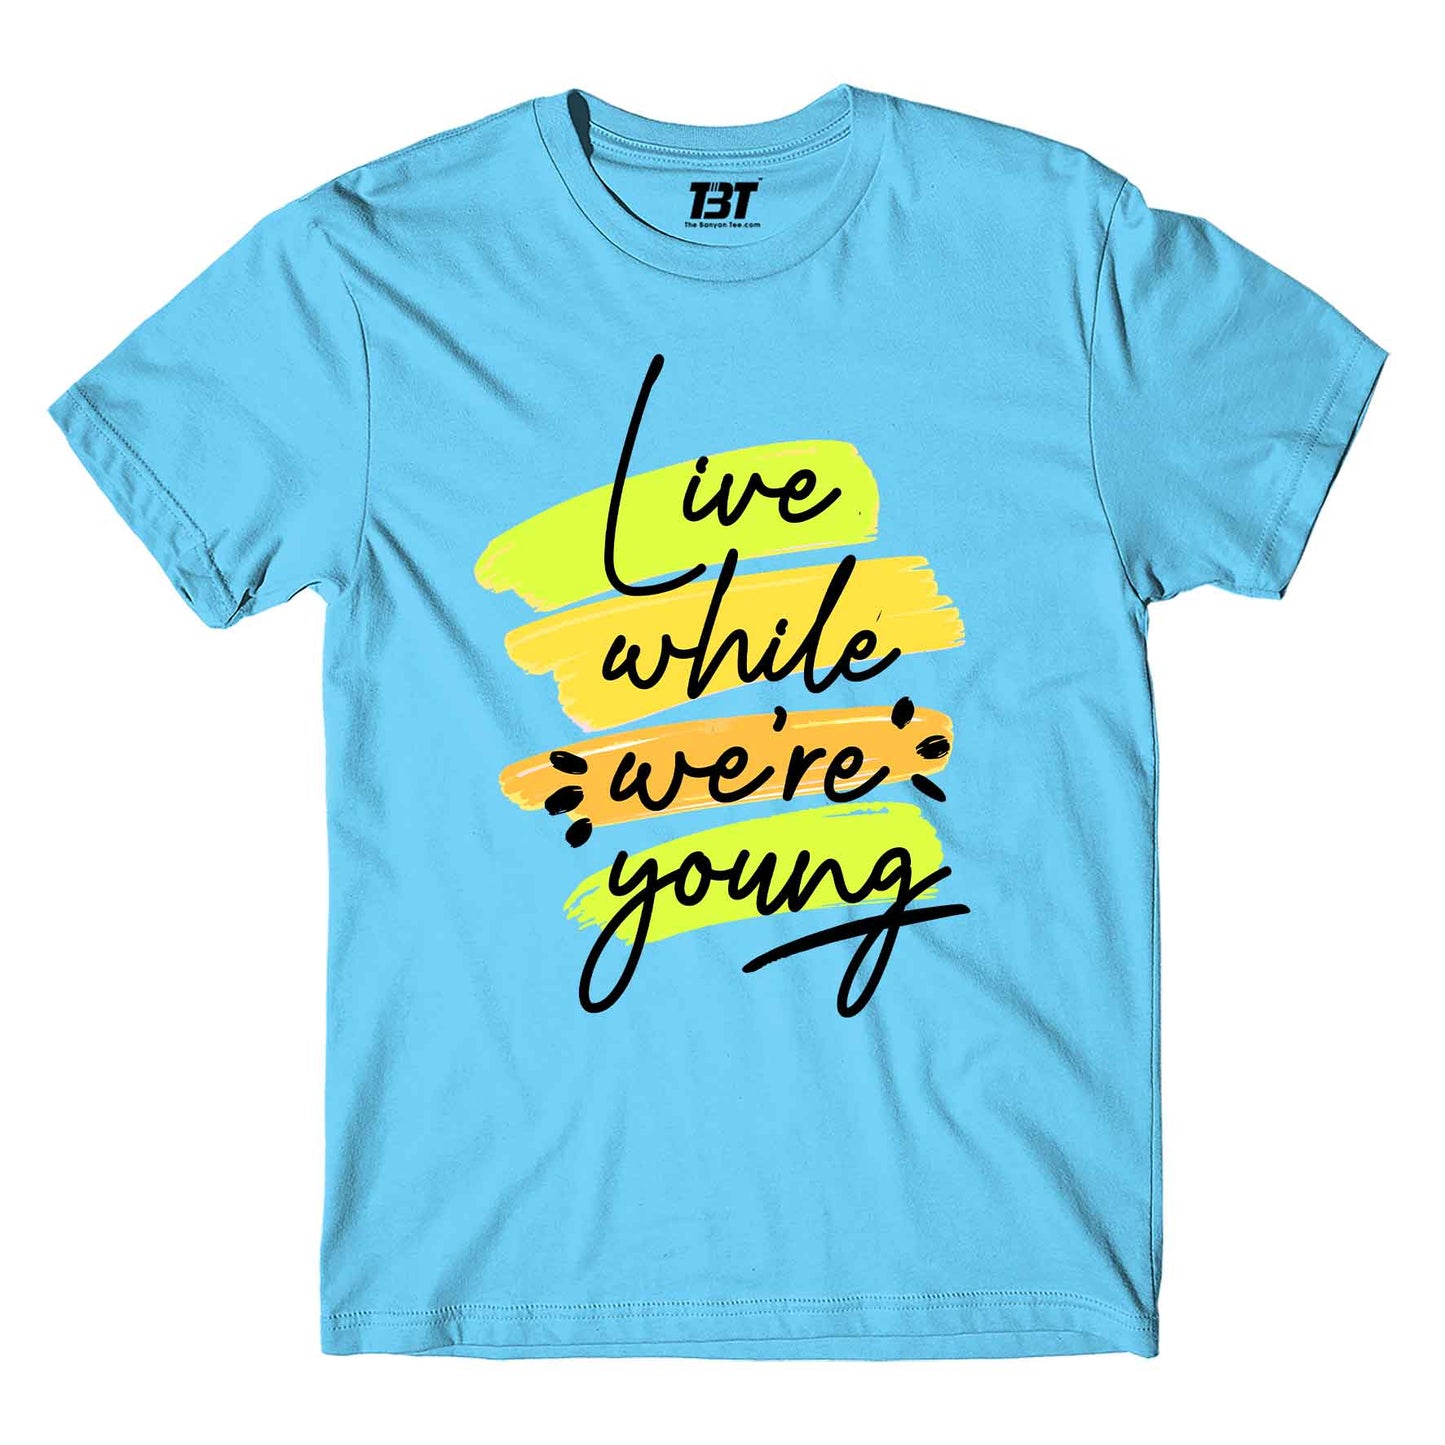 one direction live while we're young t-shirt music band buy online usa united states the banyan tee tbt men women girls boys unisex sky blue